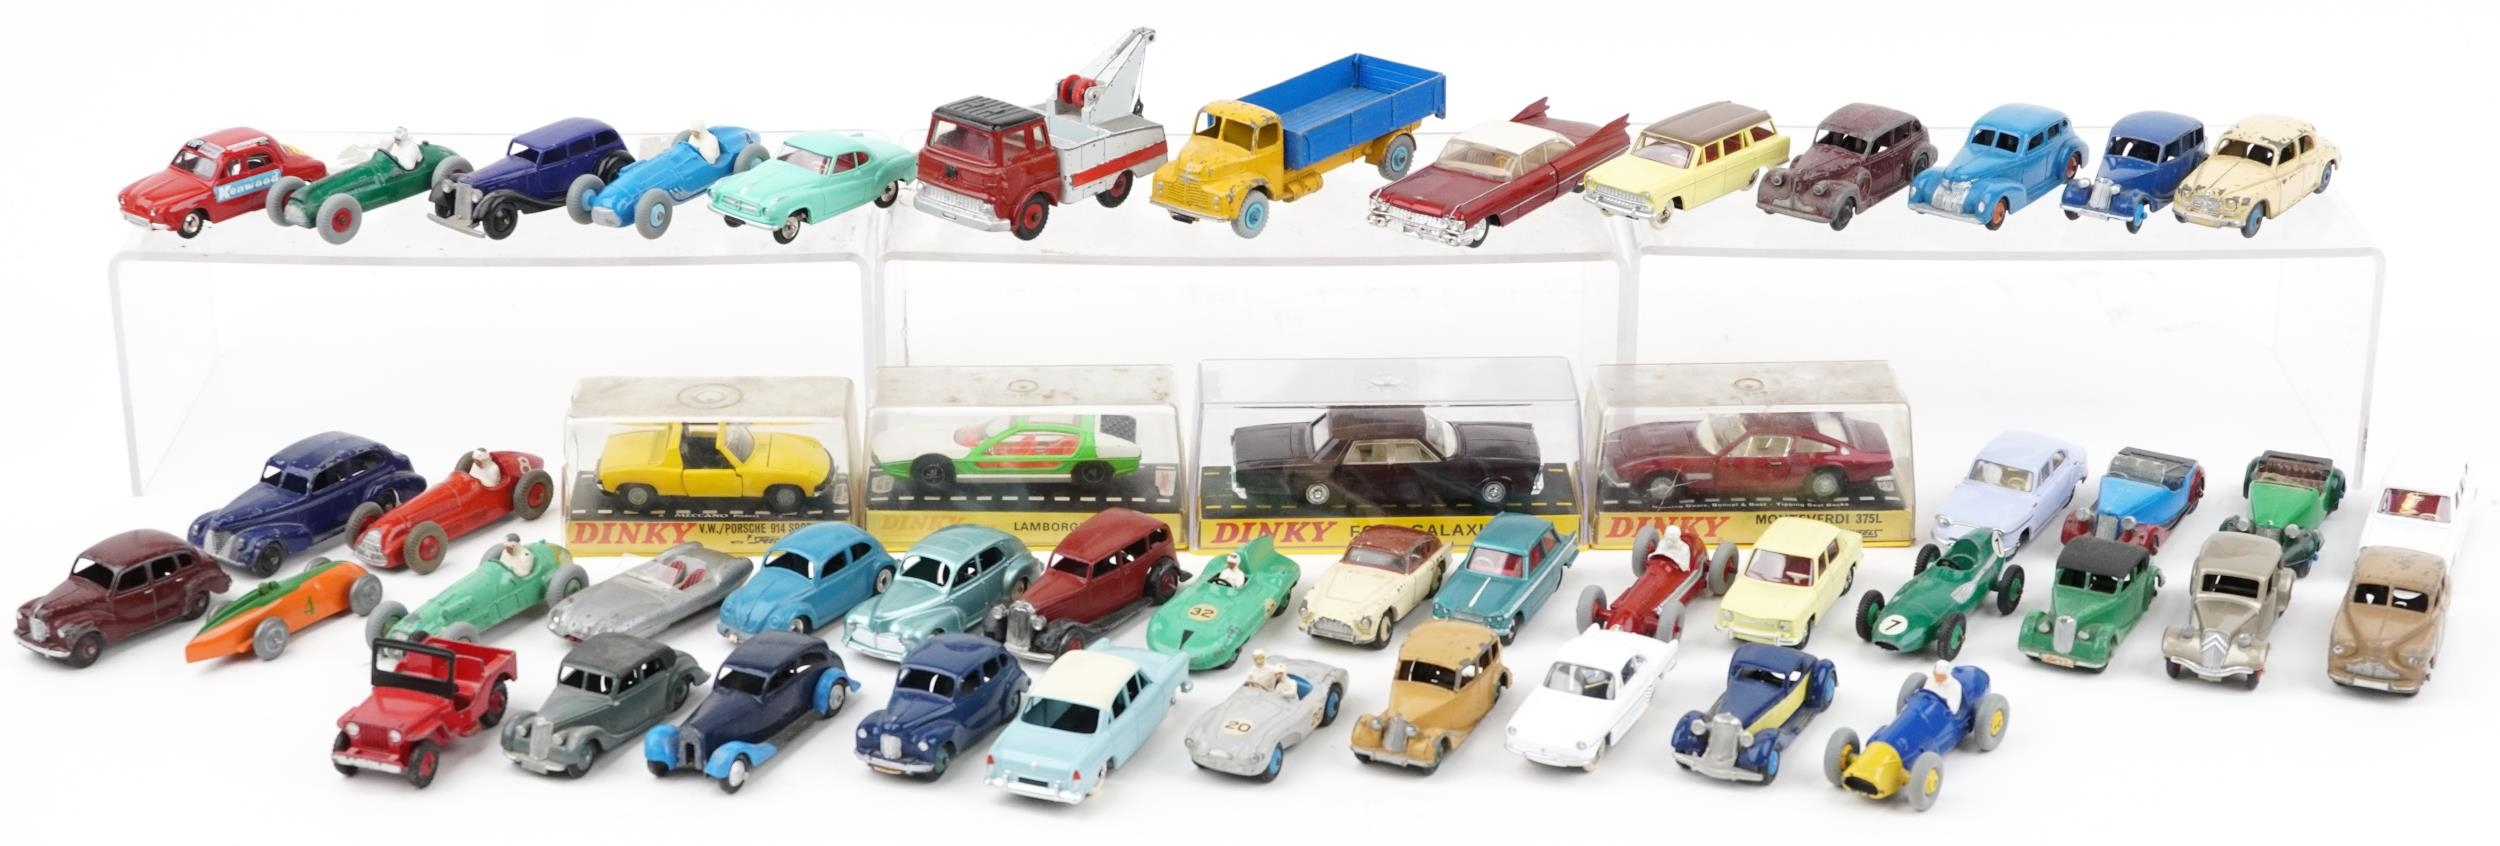 Vintage and later Dinky diecast vehicles including Cooper Bristol, Fiat 1800, Talbot Lago, Alfa